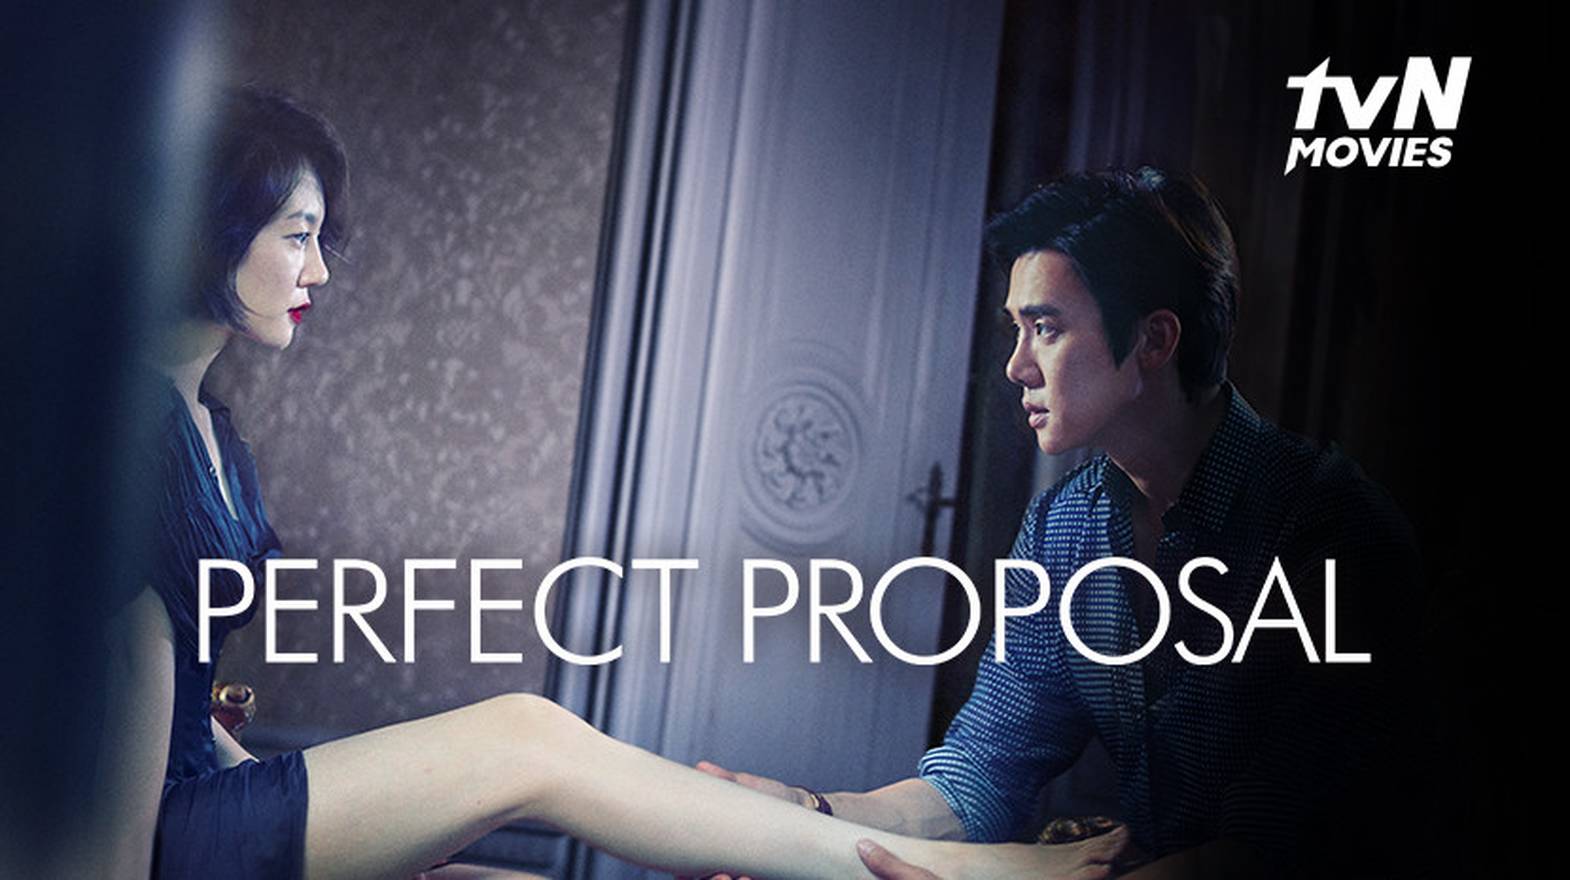 Perfect propose 4. A perfect proposal.